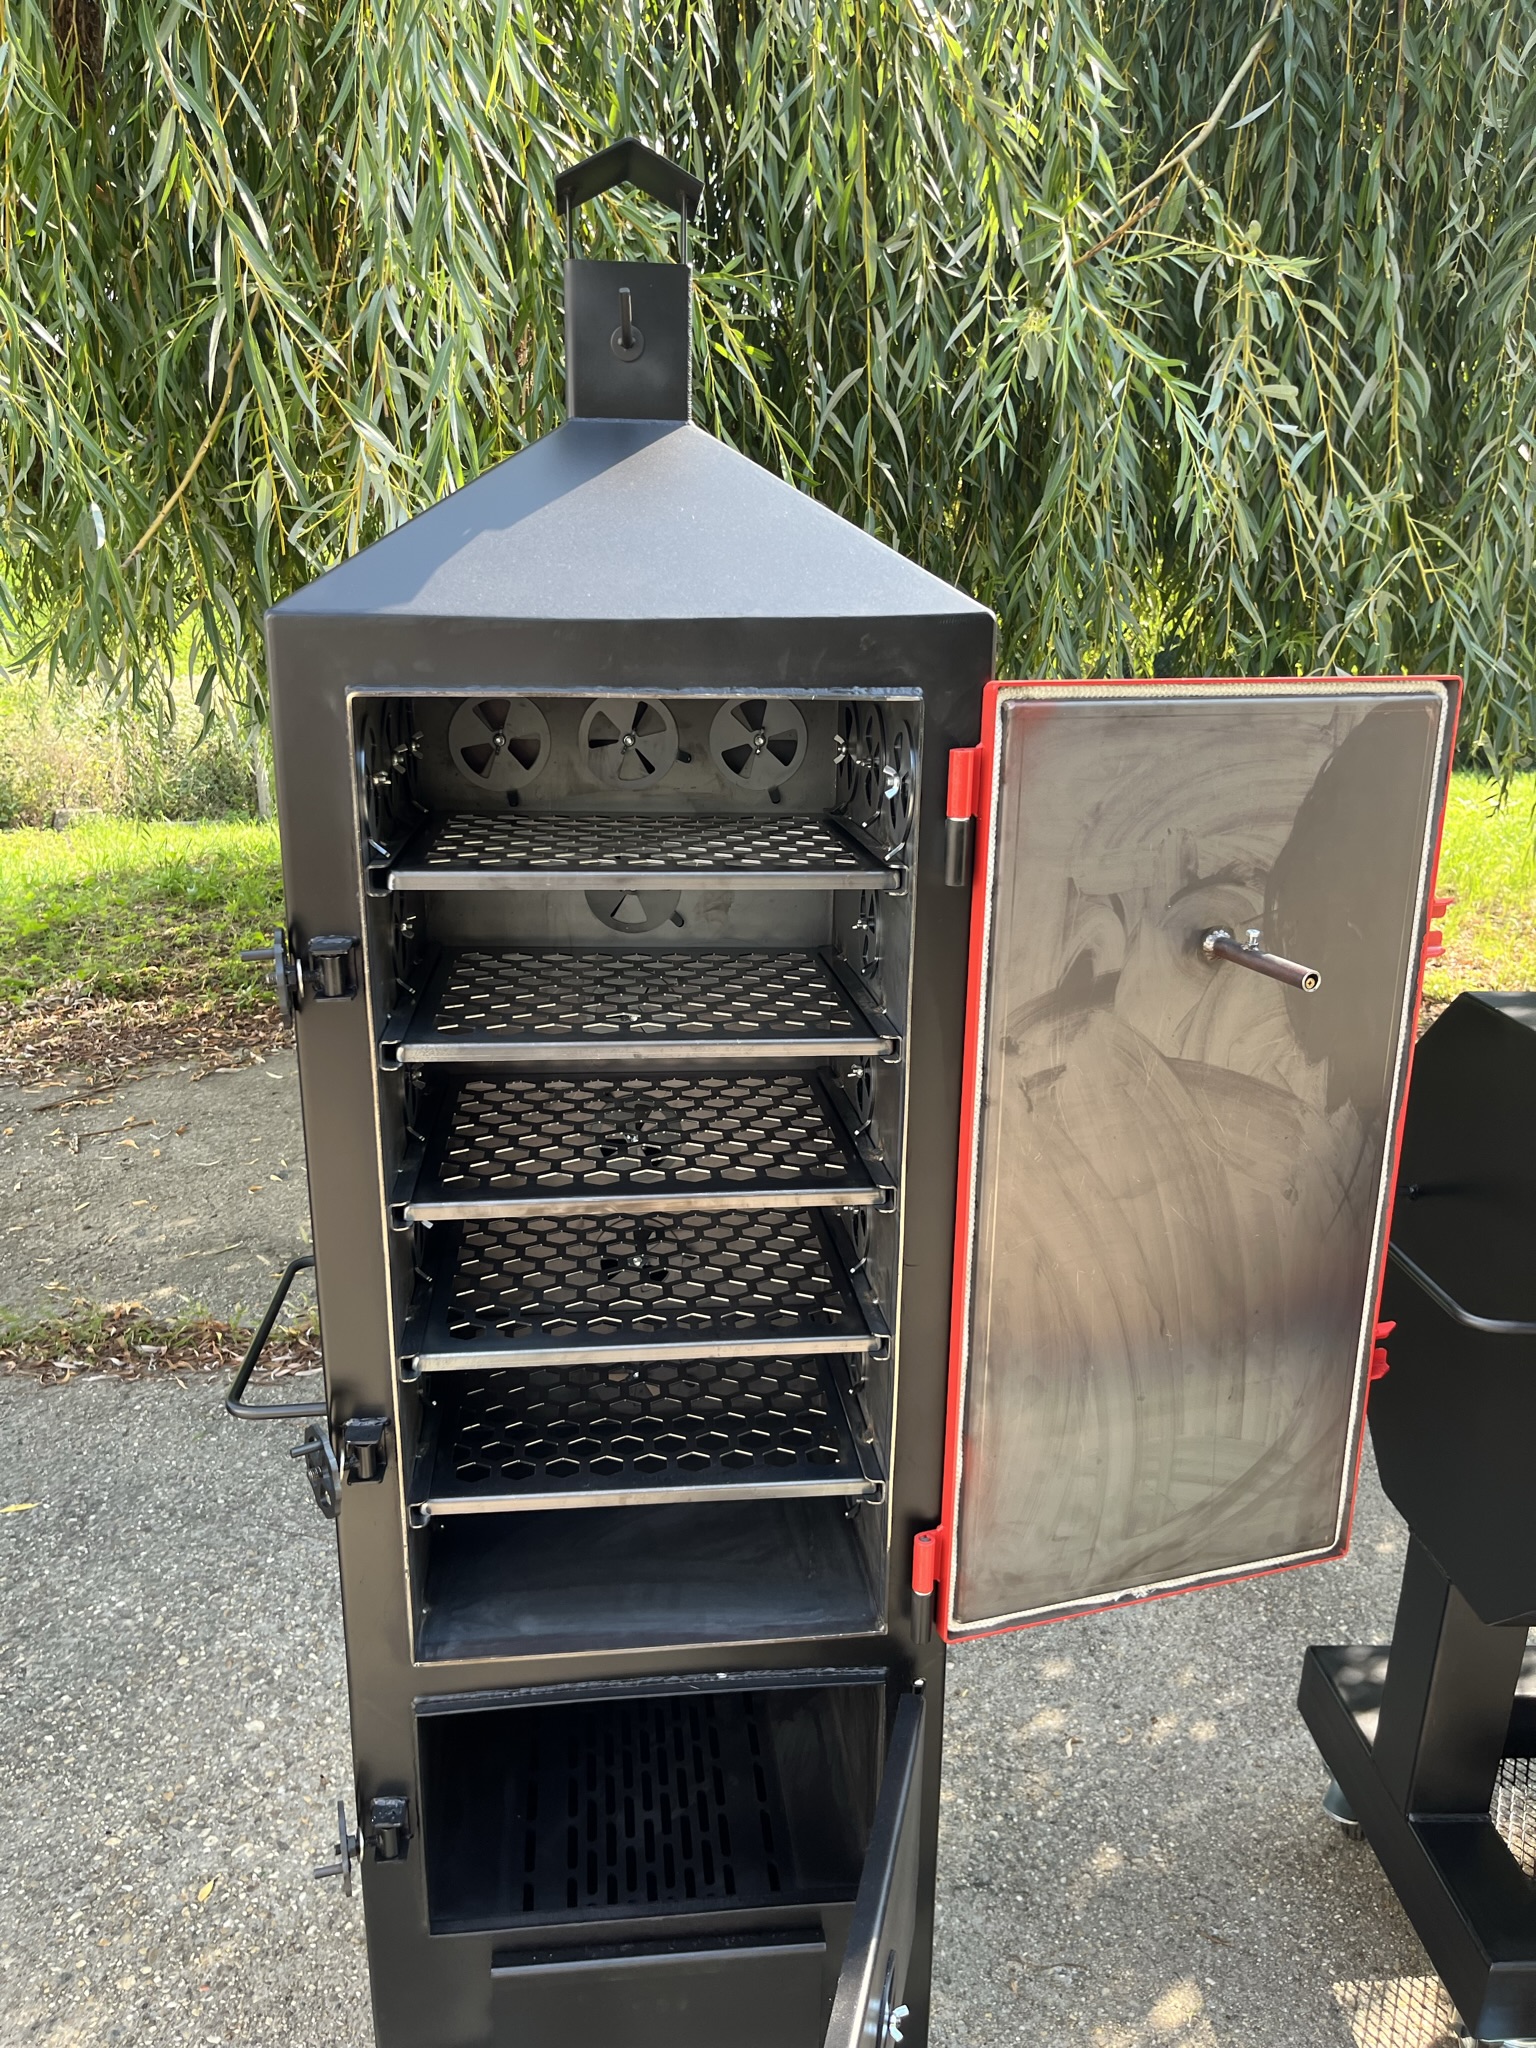 COS – Cabinet Oven Smoker „L”